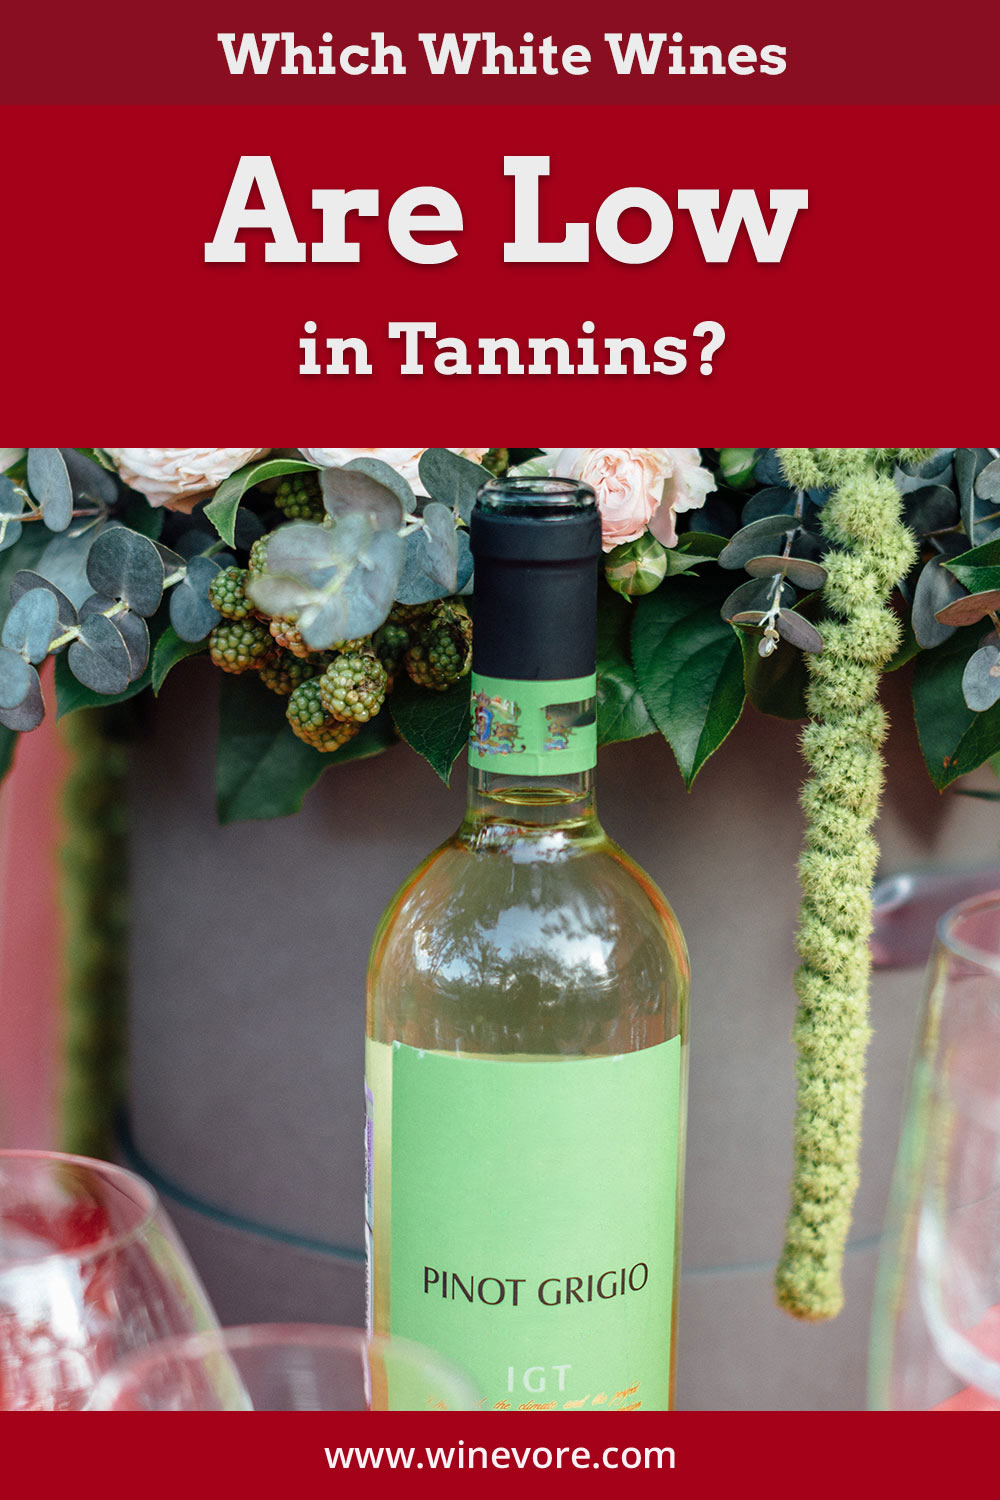 A unsealed wine bottle near decorative plants - Which White Wines Are Low in Tannins?